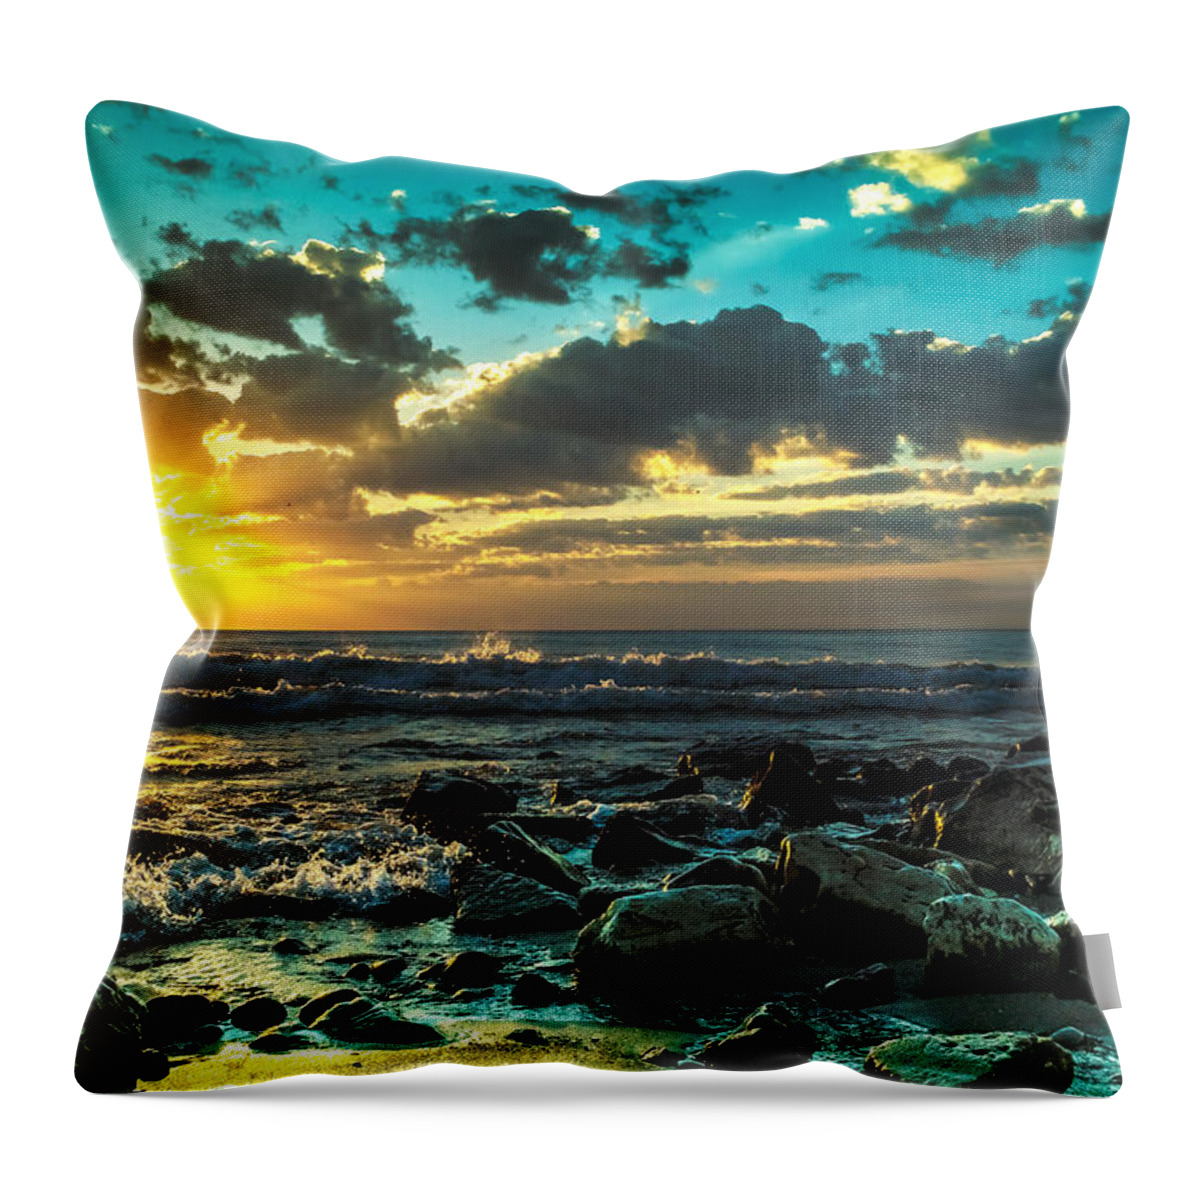 Sunrise Throw Pillow featuring the photograph Glory by James Meyer